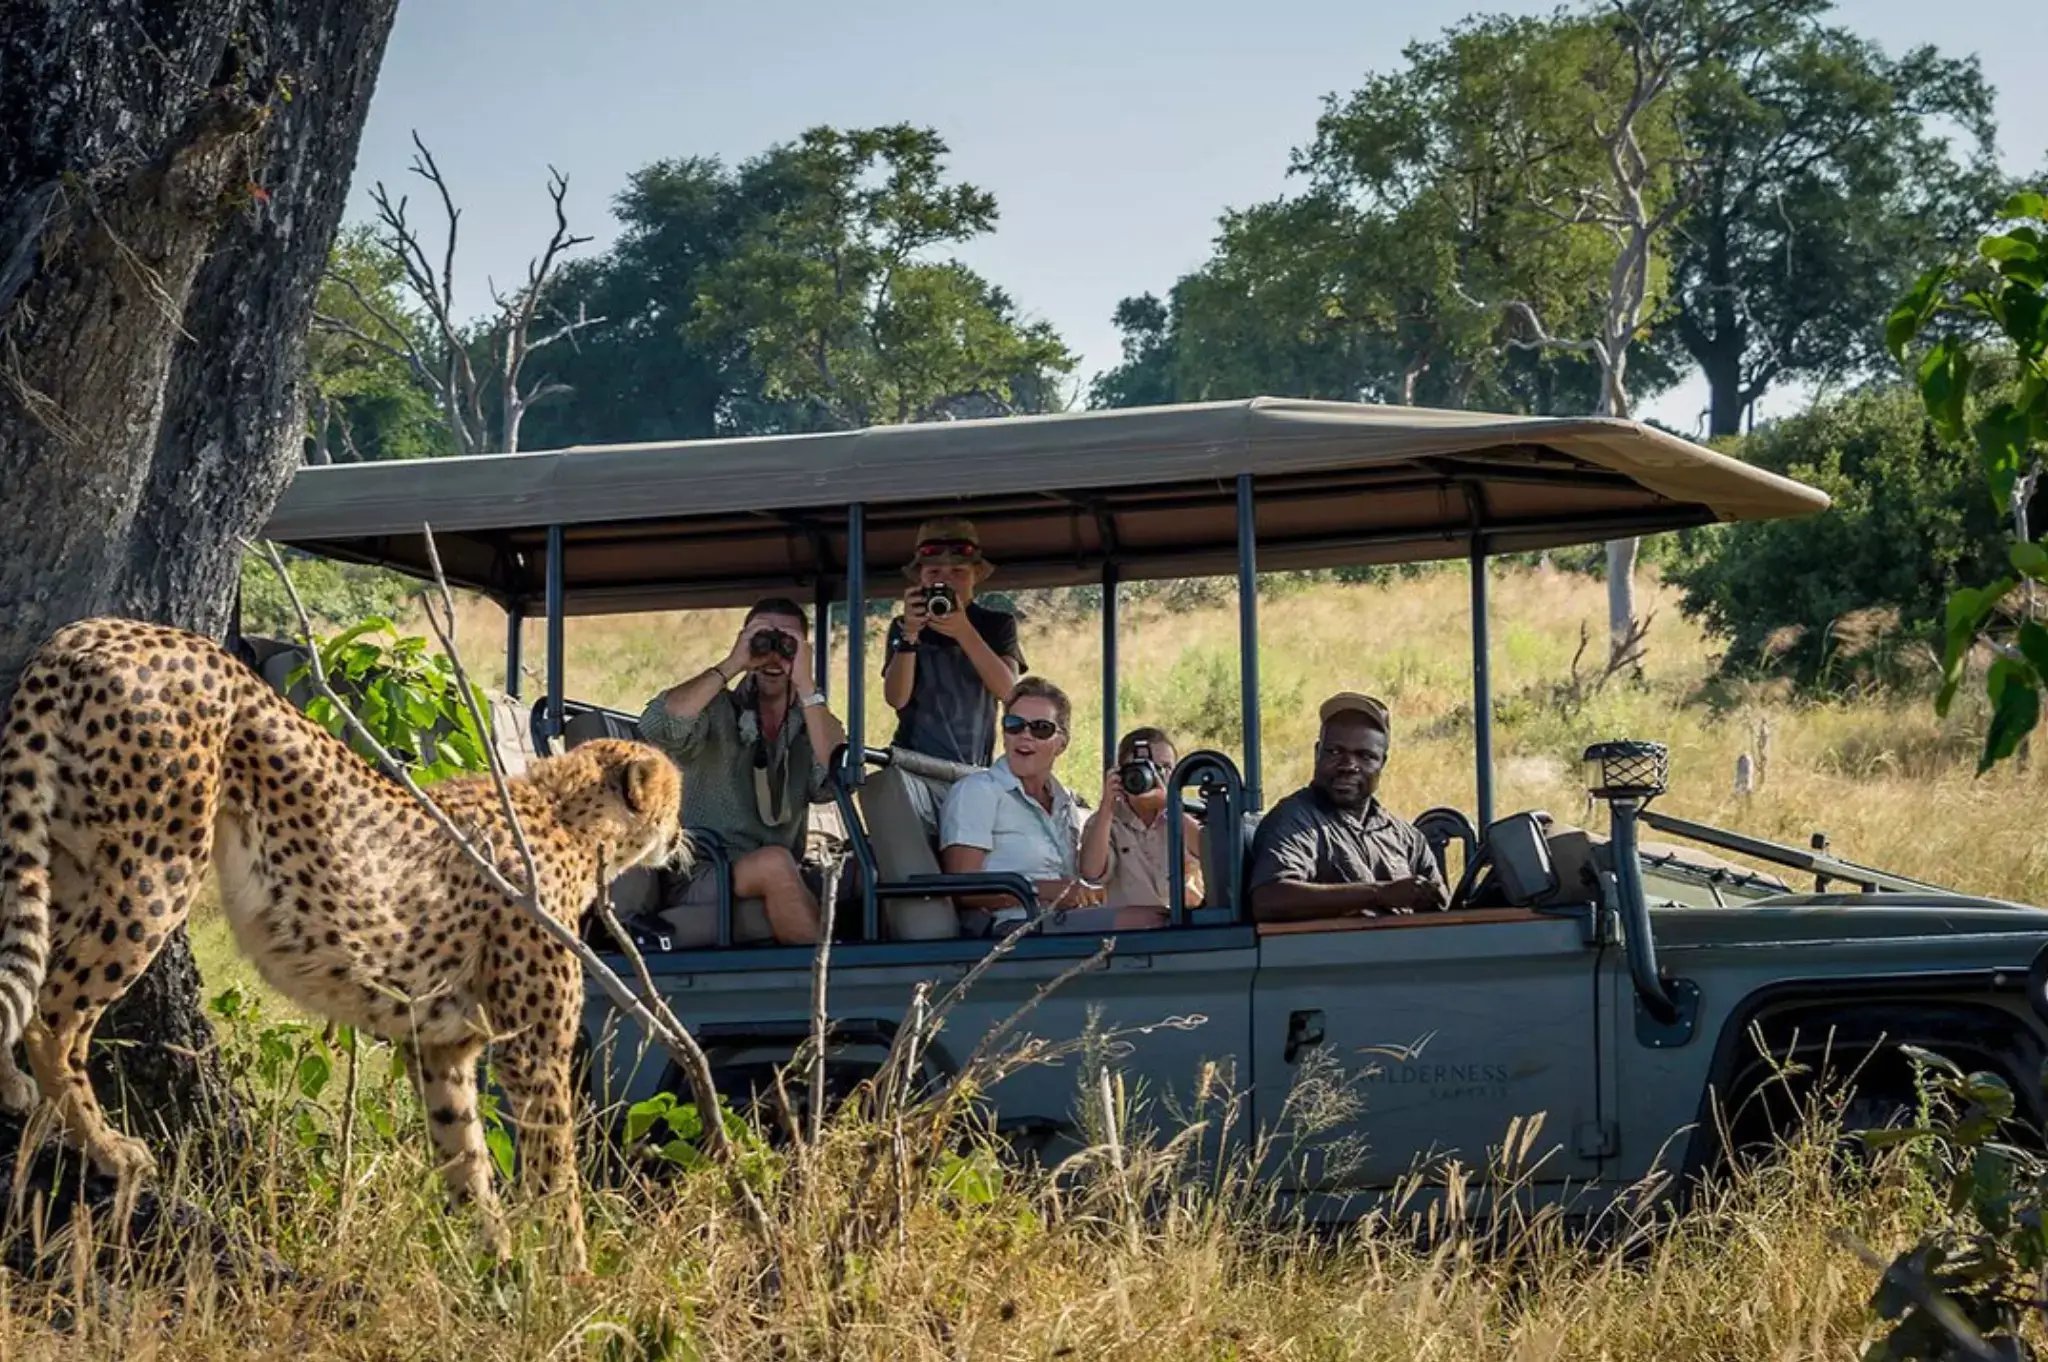 a group of travelers capturing an image of a cheetah from a safari vehicle